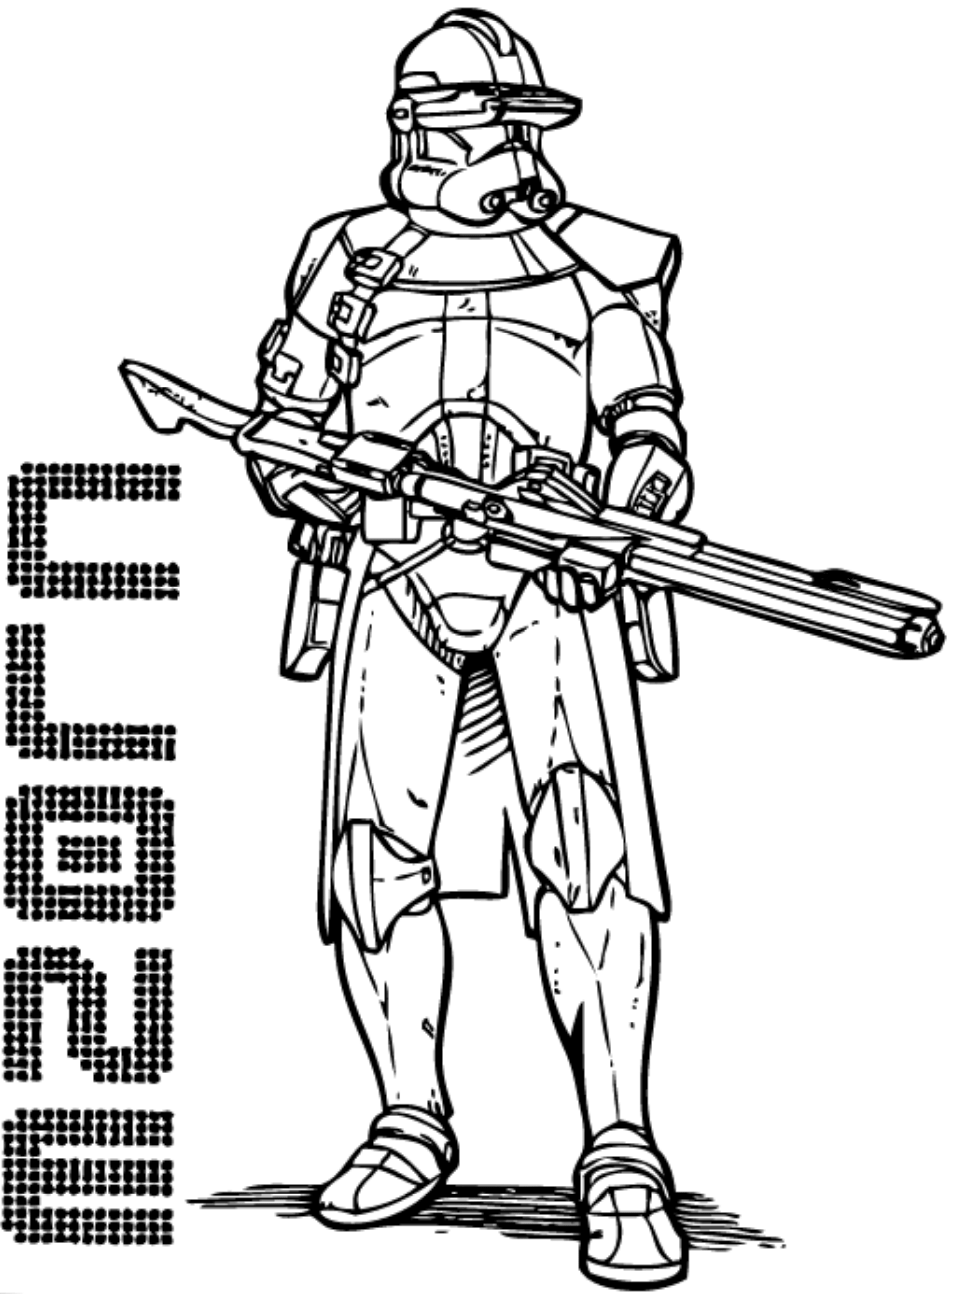 Clone Stormtrooper Coloring Page